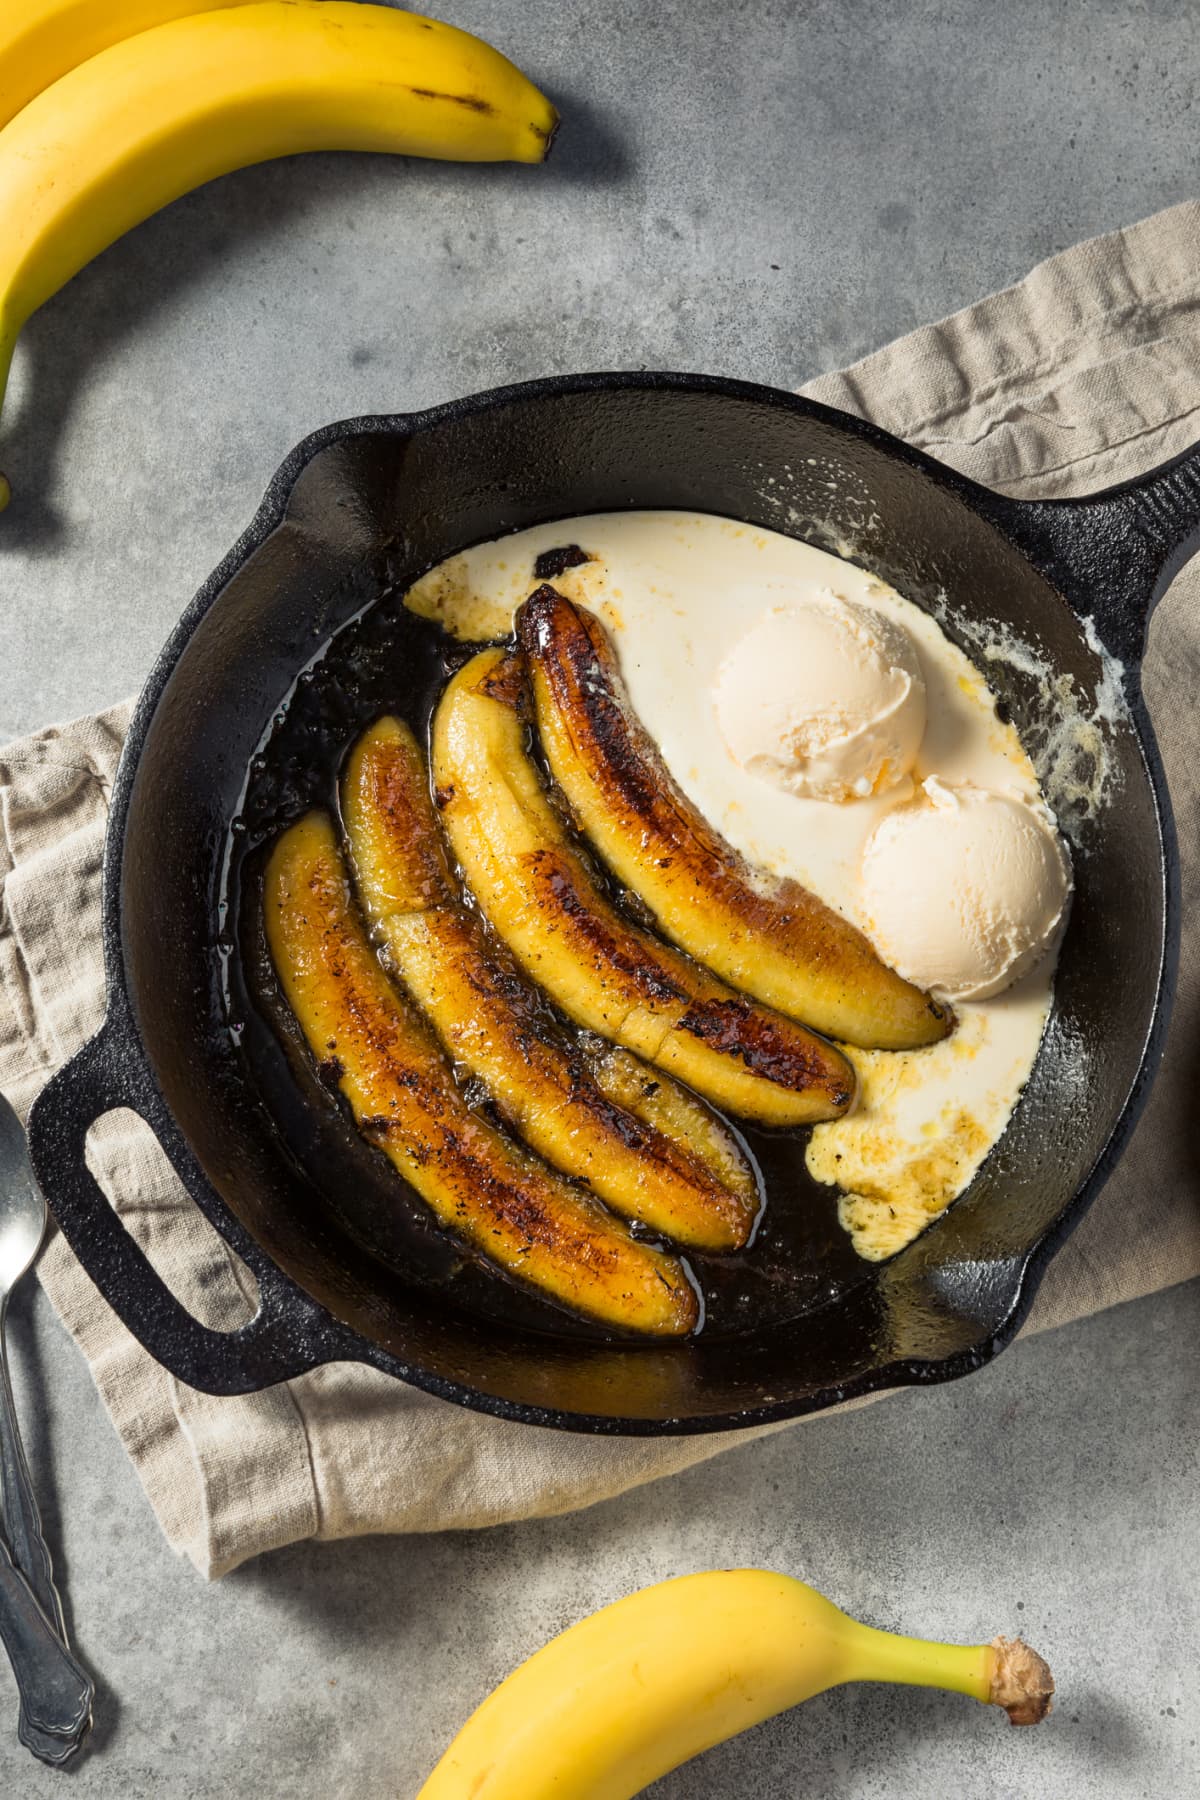 Bananas foster with roasted bananas and ice cream